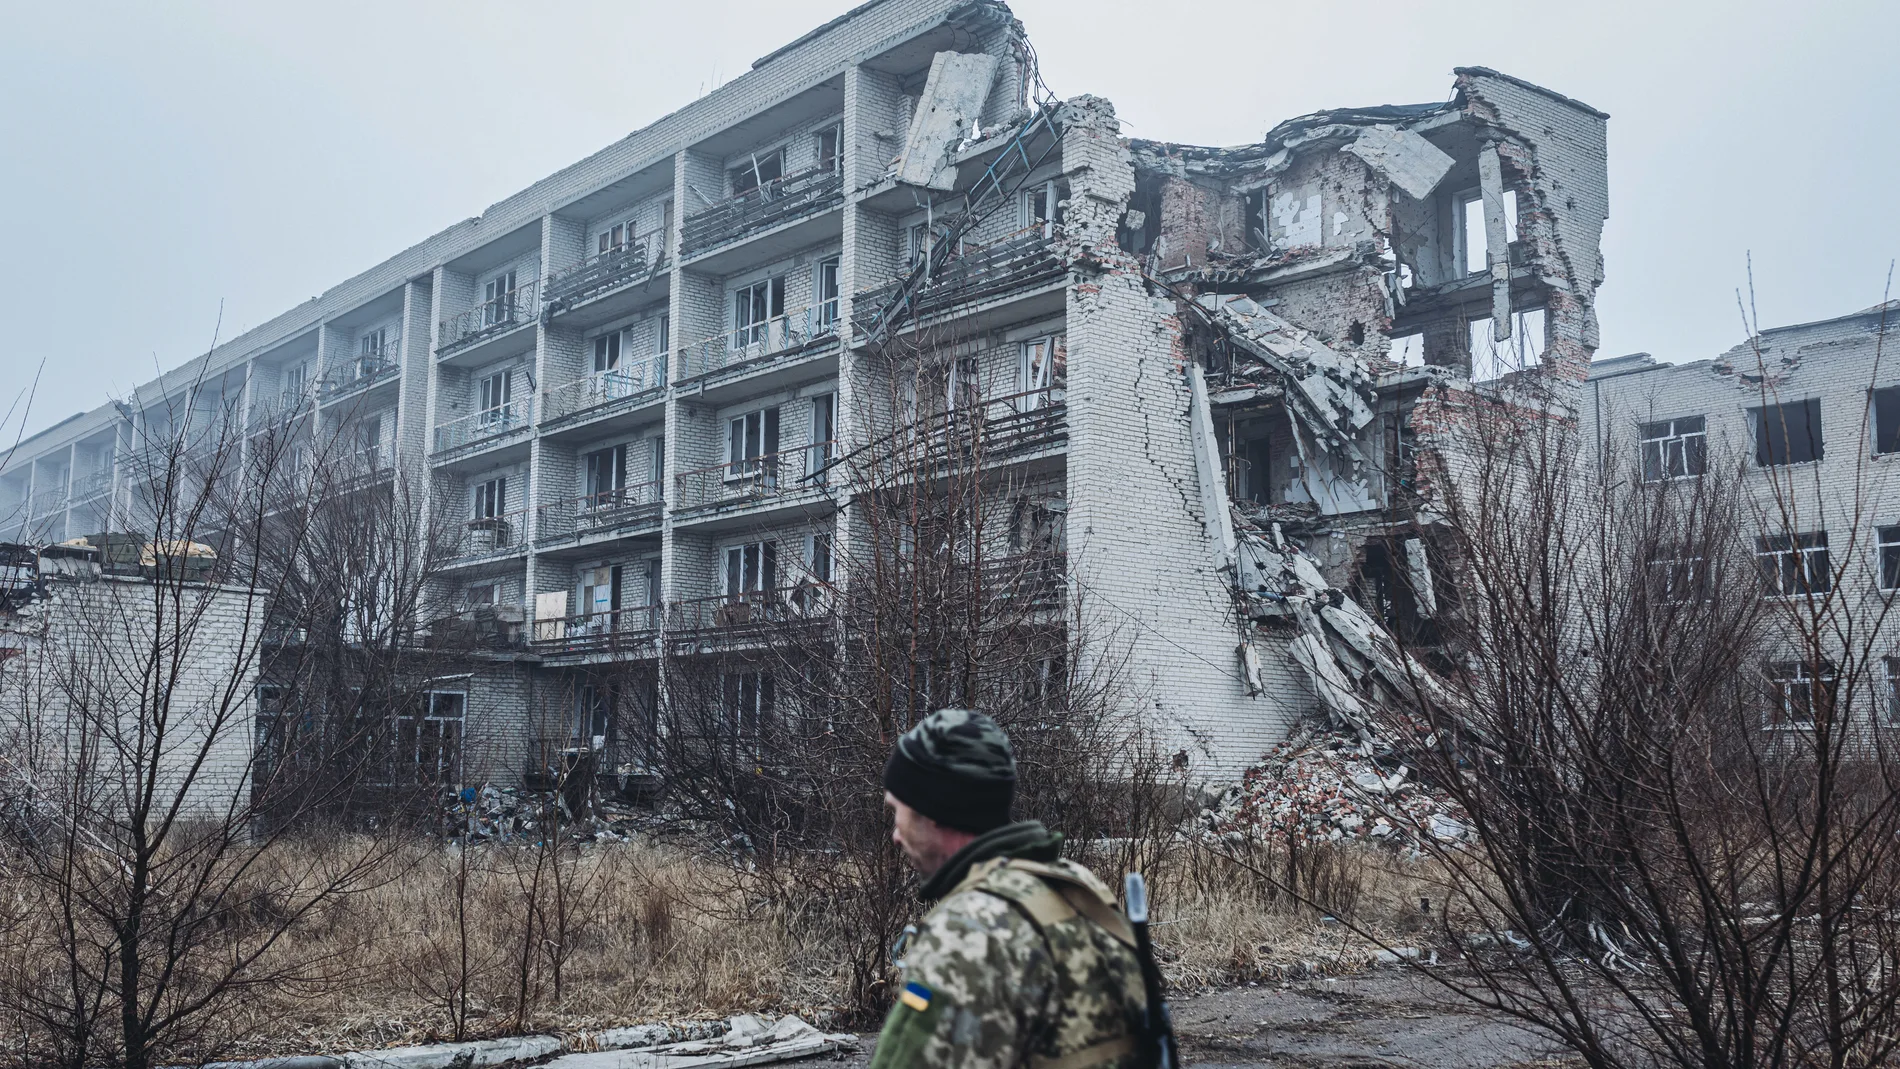 February 27, 2021, Marinka, Donetsk, Ukraine: A soldier walks in front of a building destroyed by bombs in Marinka..Since 2014, a war has been going on in eastern Ukraine in Donetsk and Lugansk oblasts. This territory is in dispute between Ukrainian forces and pro-Russian rebels. (Foto de ARCHIVO) 27/02/2021